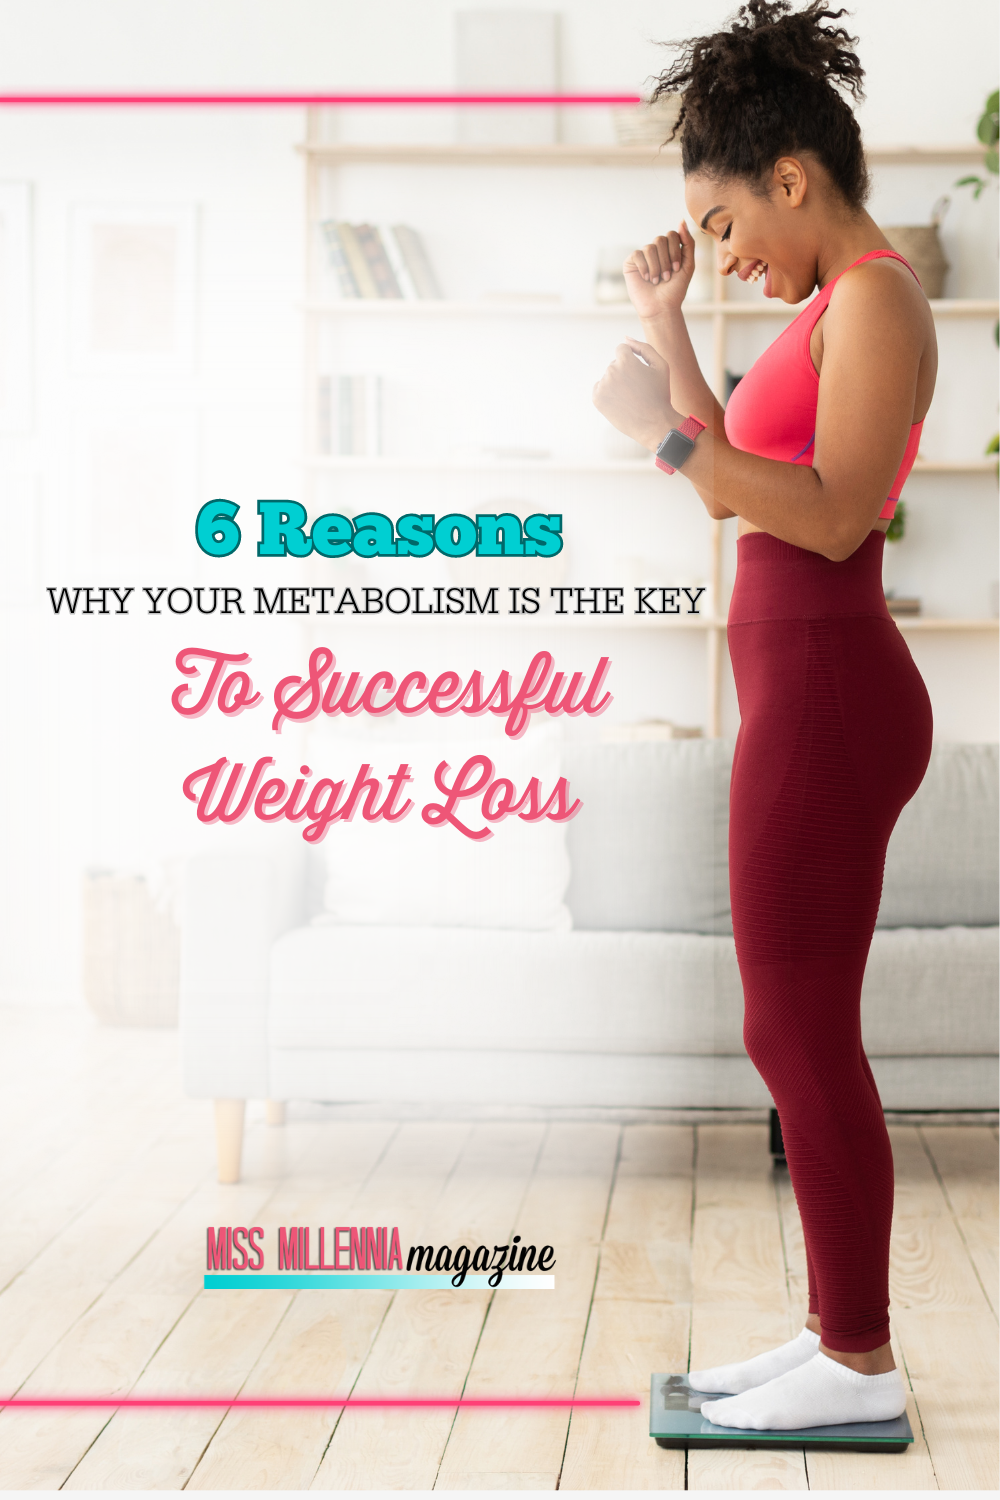 6 Reasons Why Your Metabolism Is The Key To Successful Weight Loss